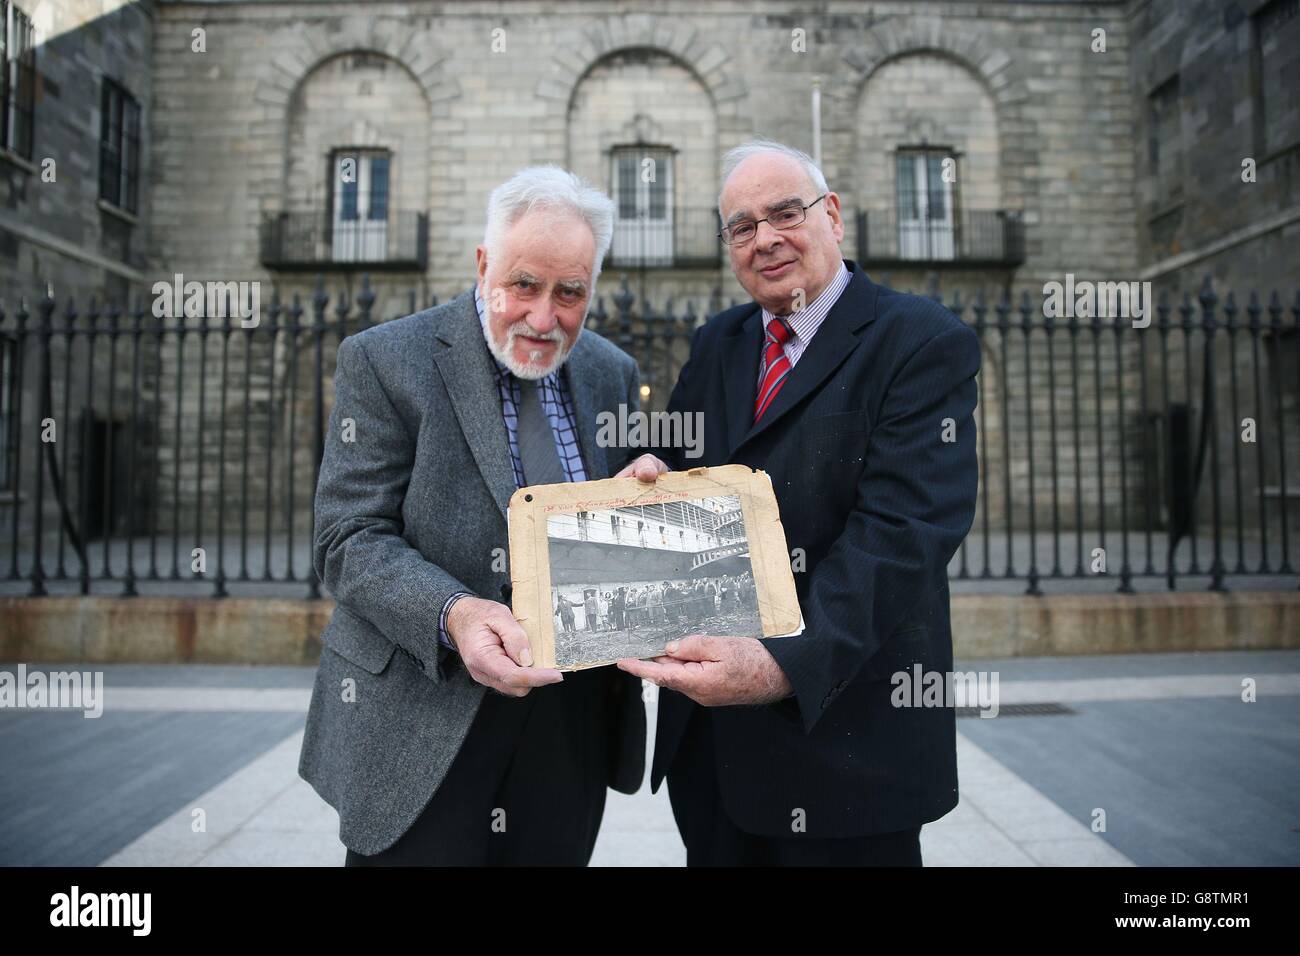 Damien Cassidy (right), chairman of the board of visitors in Kilmainham and one of the original trustees of the Kilmainham Gaol Restoration Committee set up in 1960, and fellow volunteer George Saunders, hold a photograph showing the voluntary workers' first visit to the gaol in May 1960, as they attend a special event in Dublin, Ireland, held to honour the Kilmainham Gaol Restoration Society, the volunteer group which saved the historic prison from dereliction in the 1960s. Stock Photo